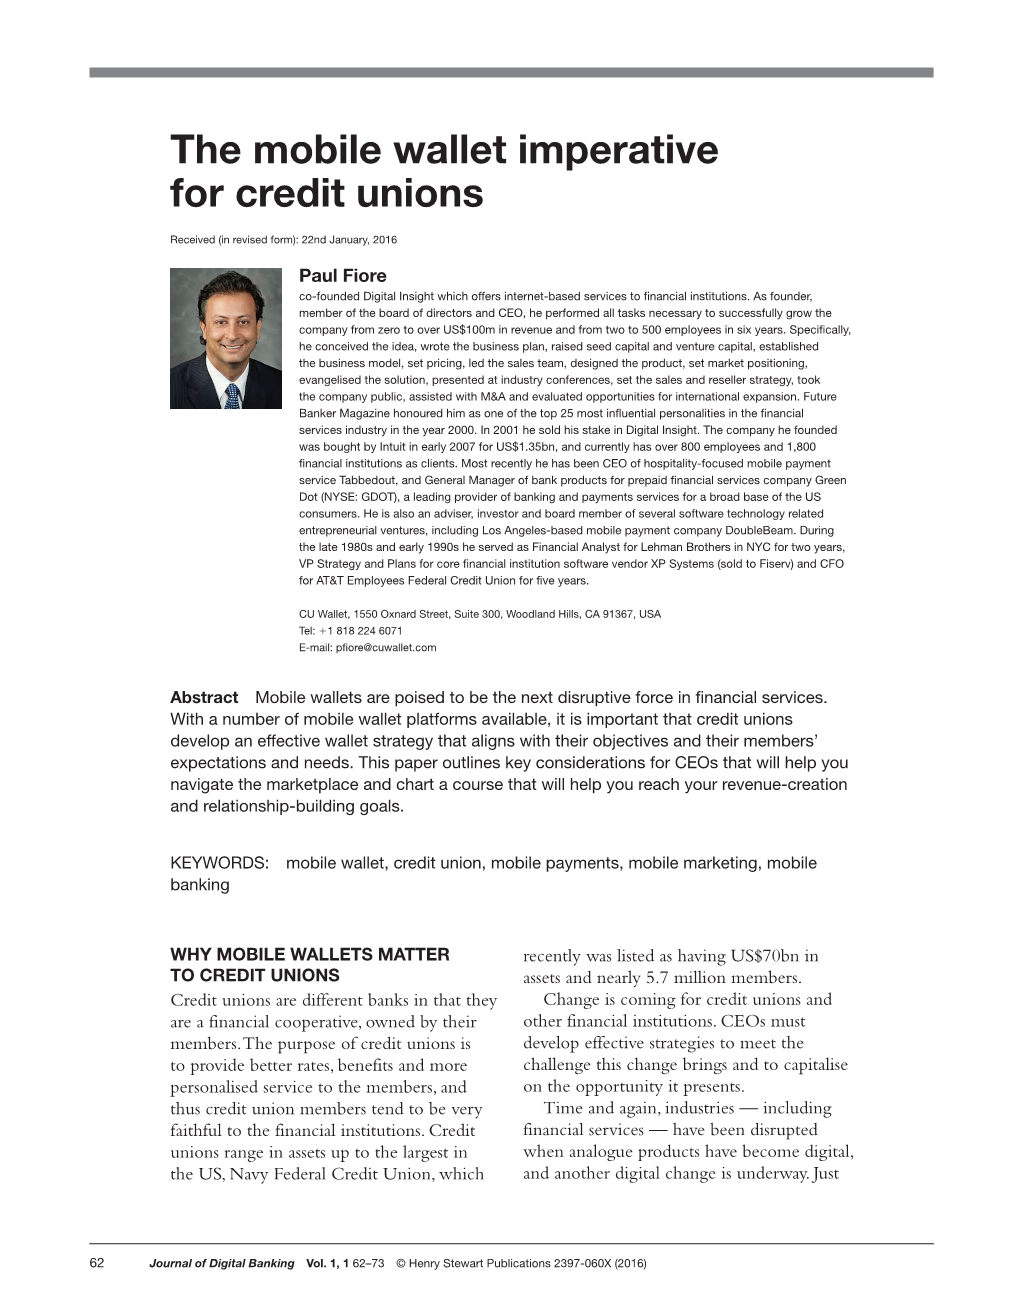 The Mobile Wallet Imperative for Credit Unions